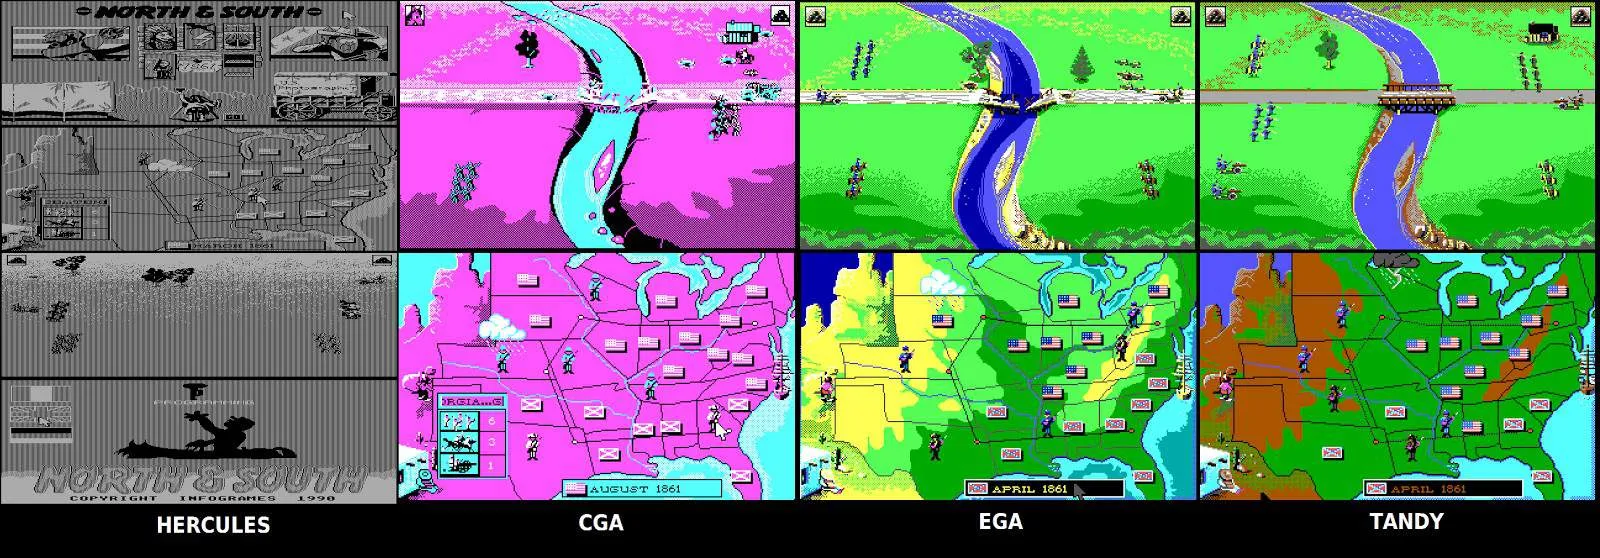 Great Strategy Games Of The Past - North & South (1989)